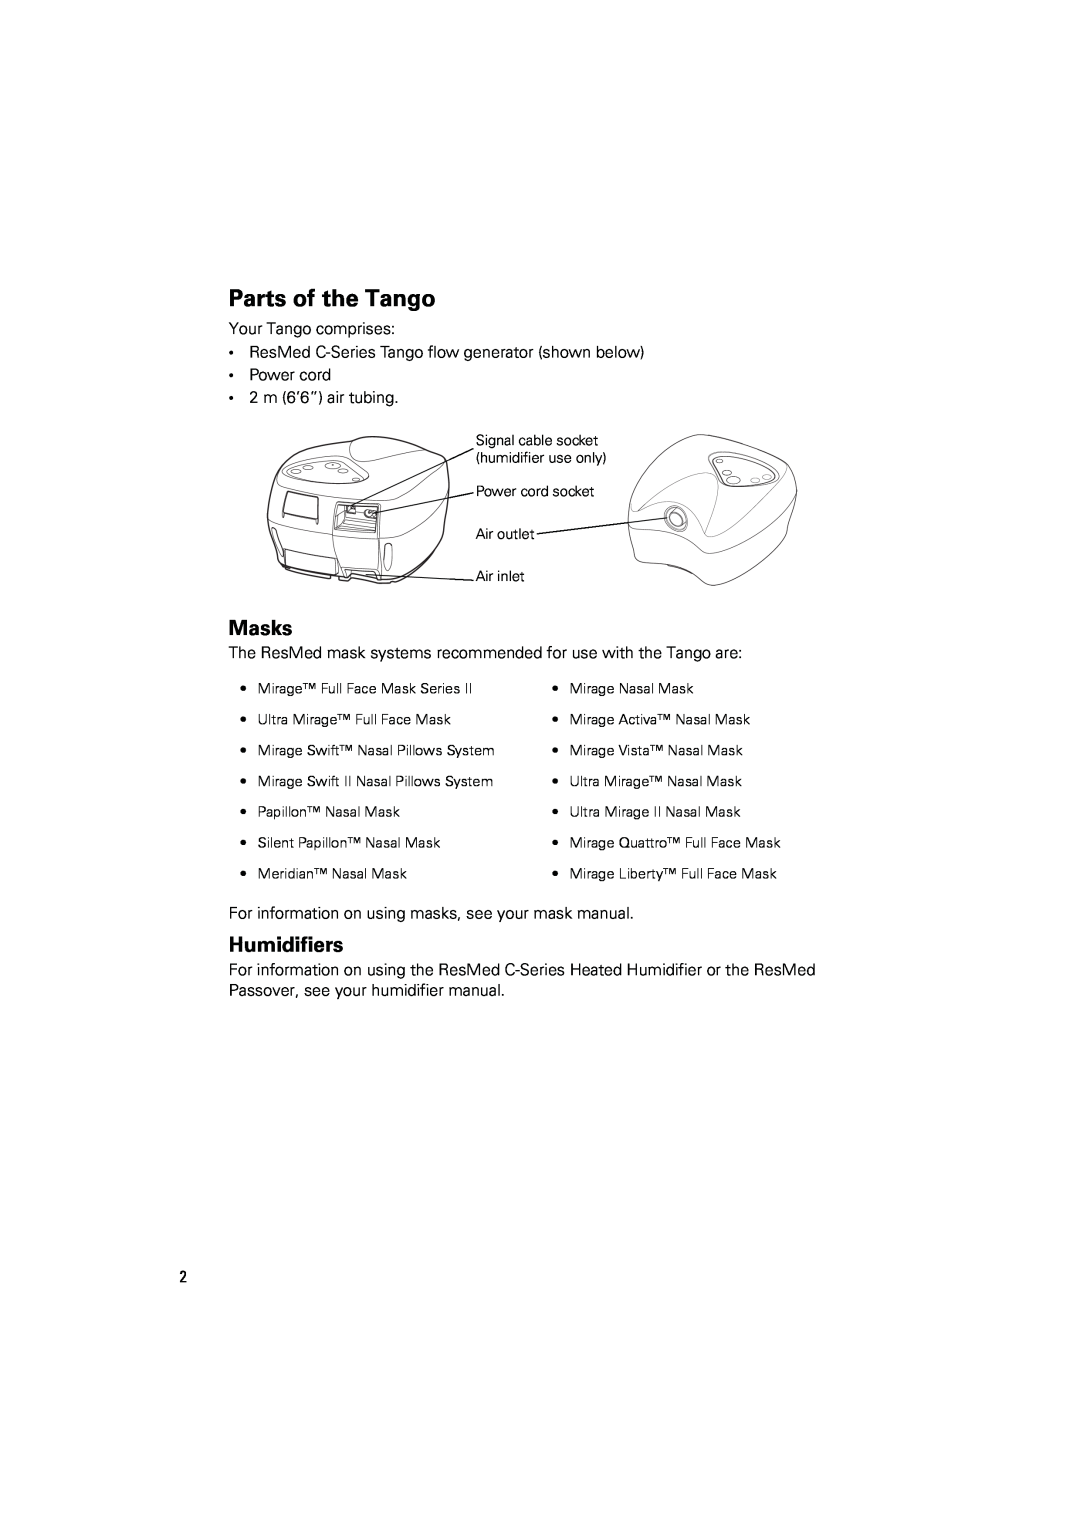 ResMed C-Series manual Parts of the Tango, Masks, Humidifiers 